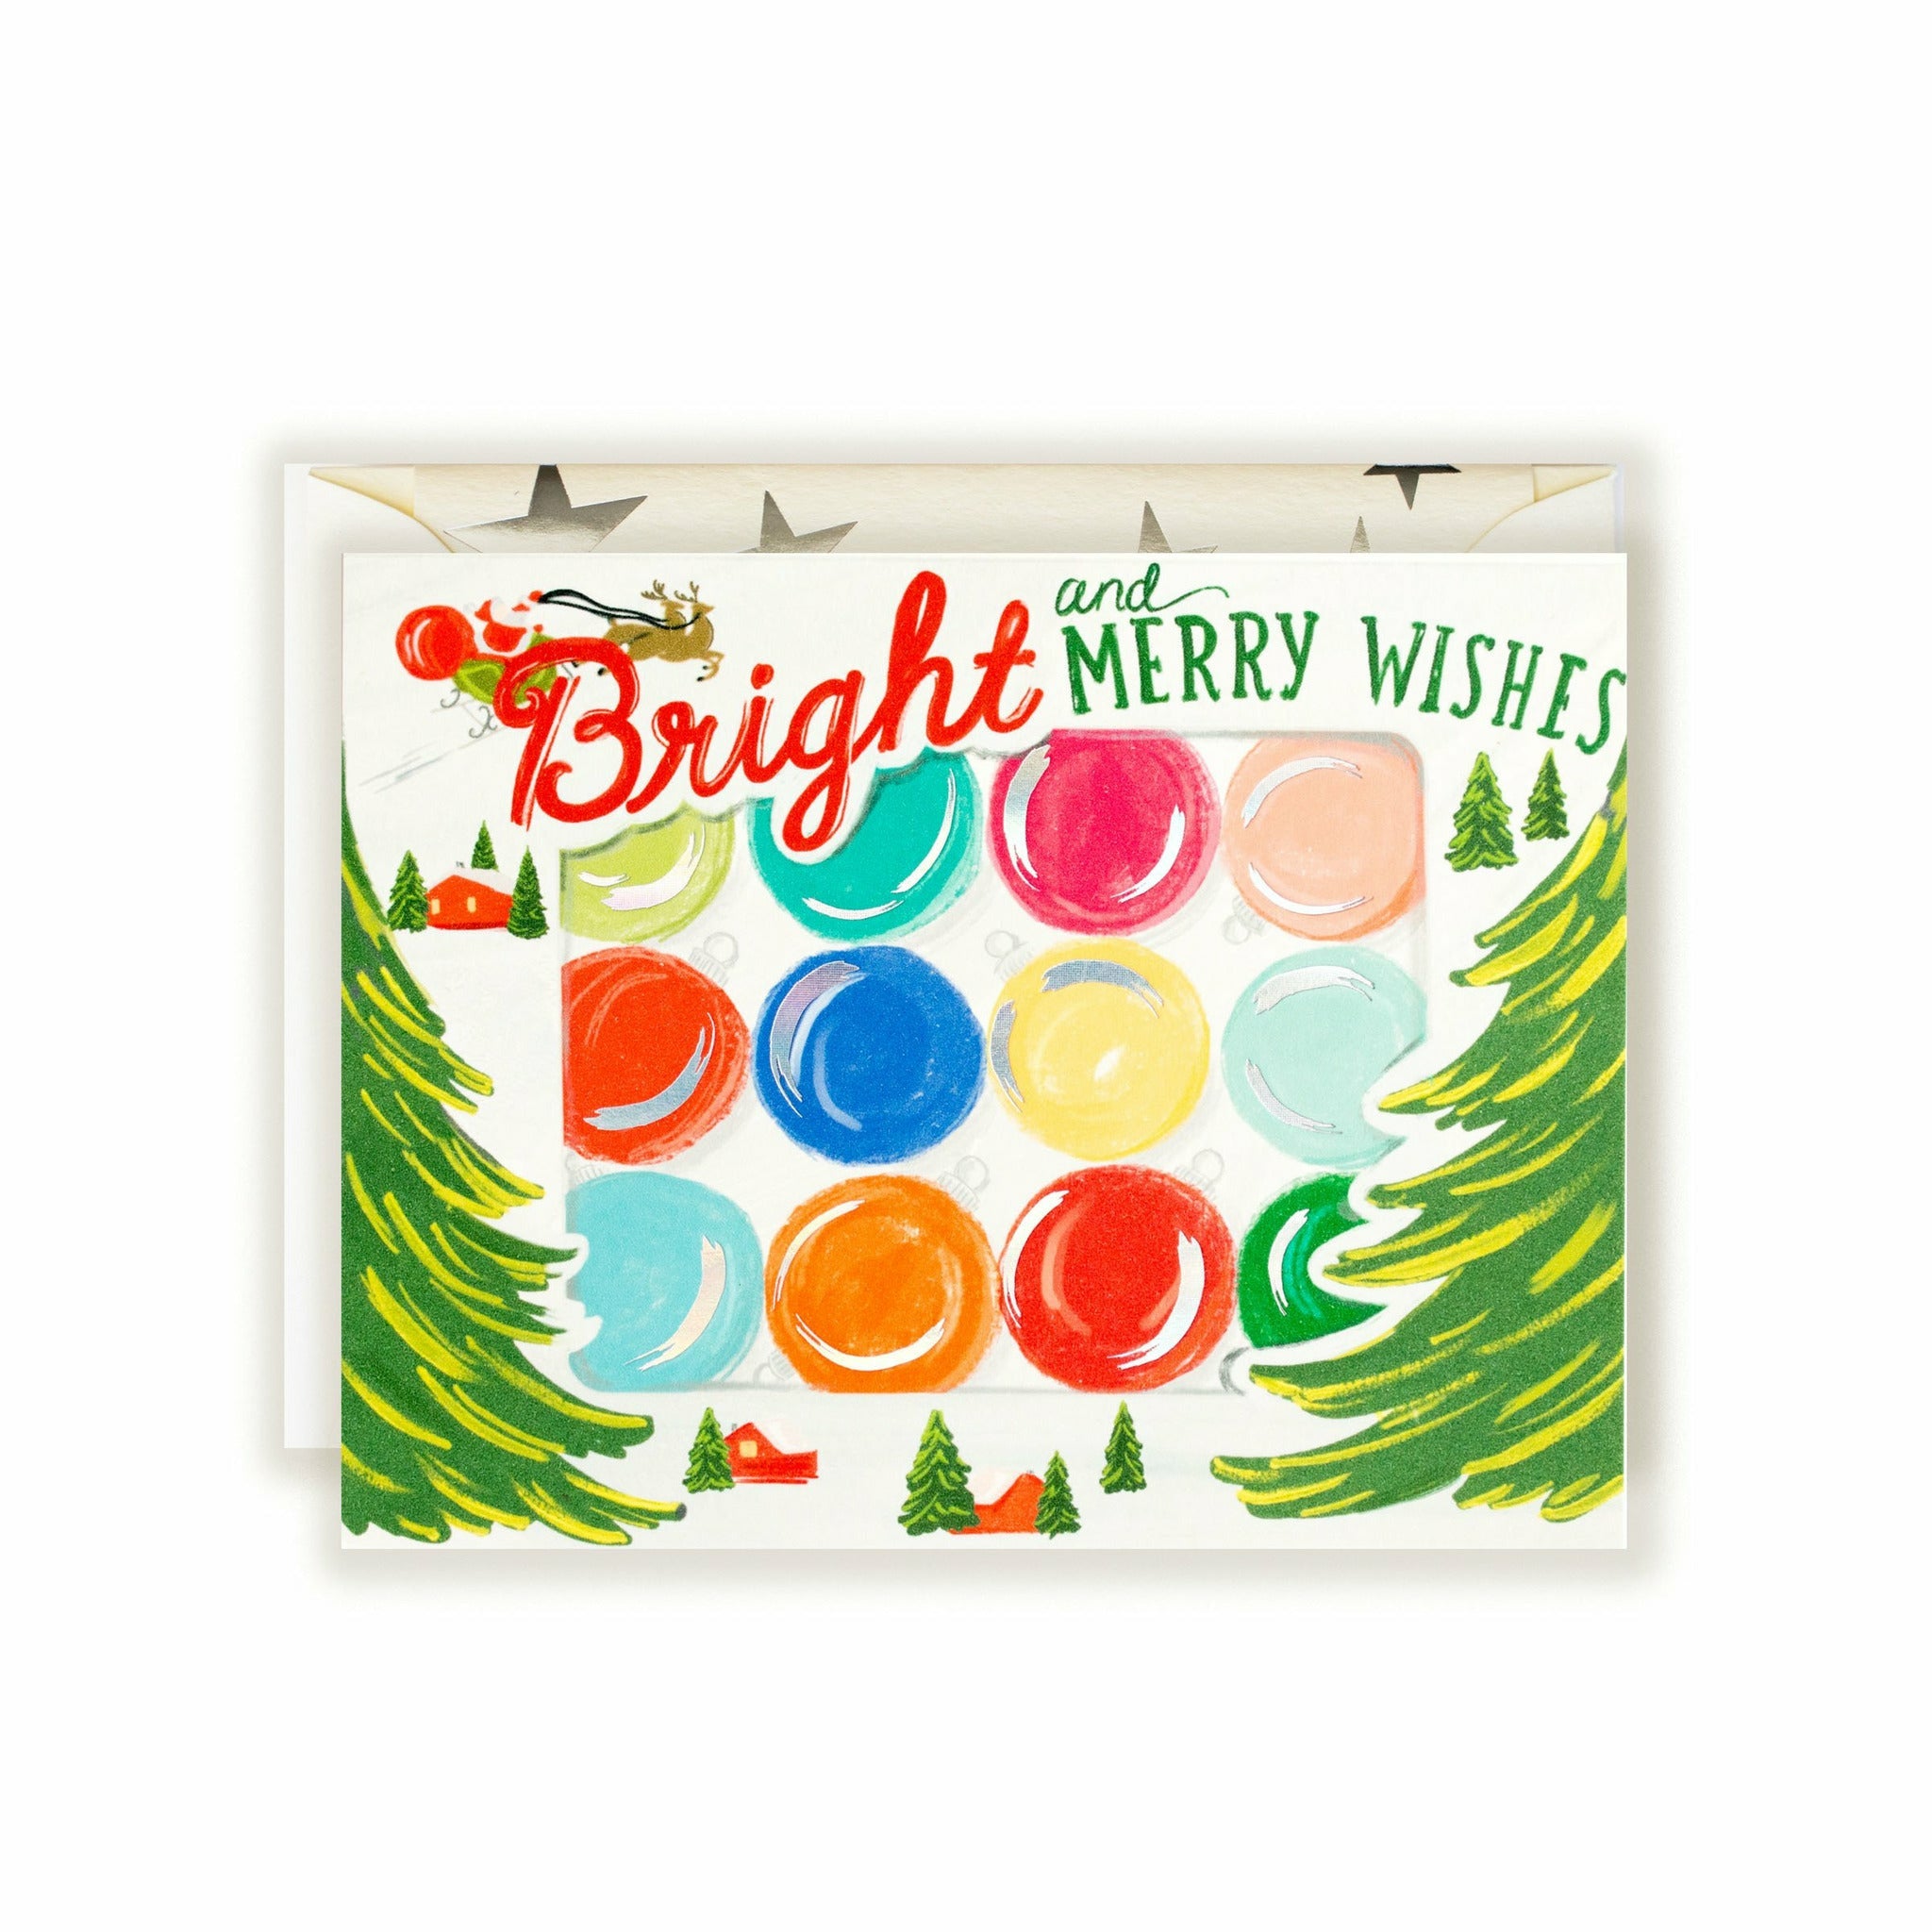 Bright and Merry Wishes First Snow Christmas-themed Ornament Box - The First Snow